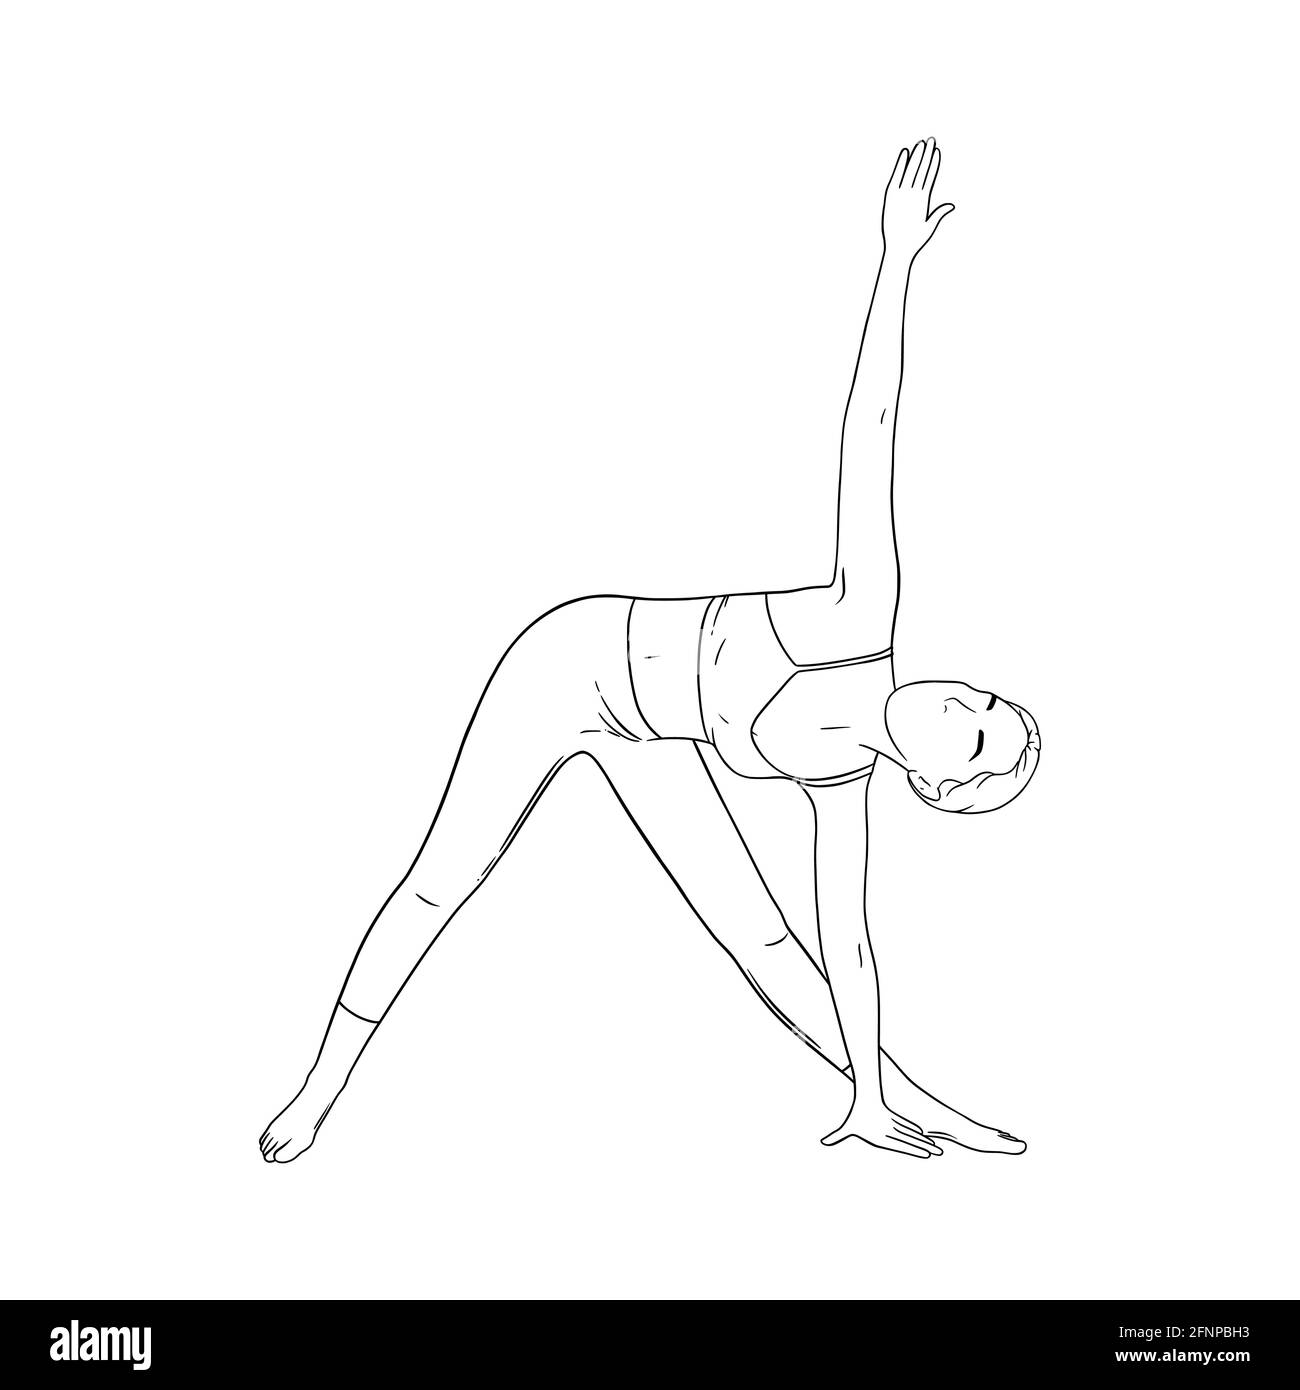 Woman in triangle yoga pose. Trikonasana pose in hatha yoga. Sketch vector illustration isolated in white background Stock Vector